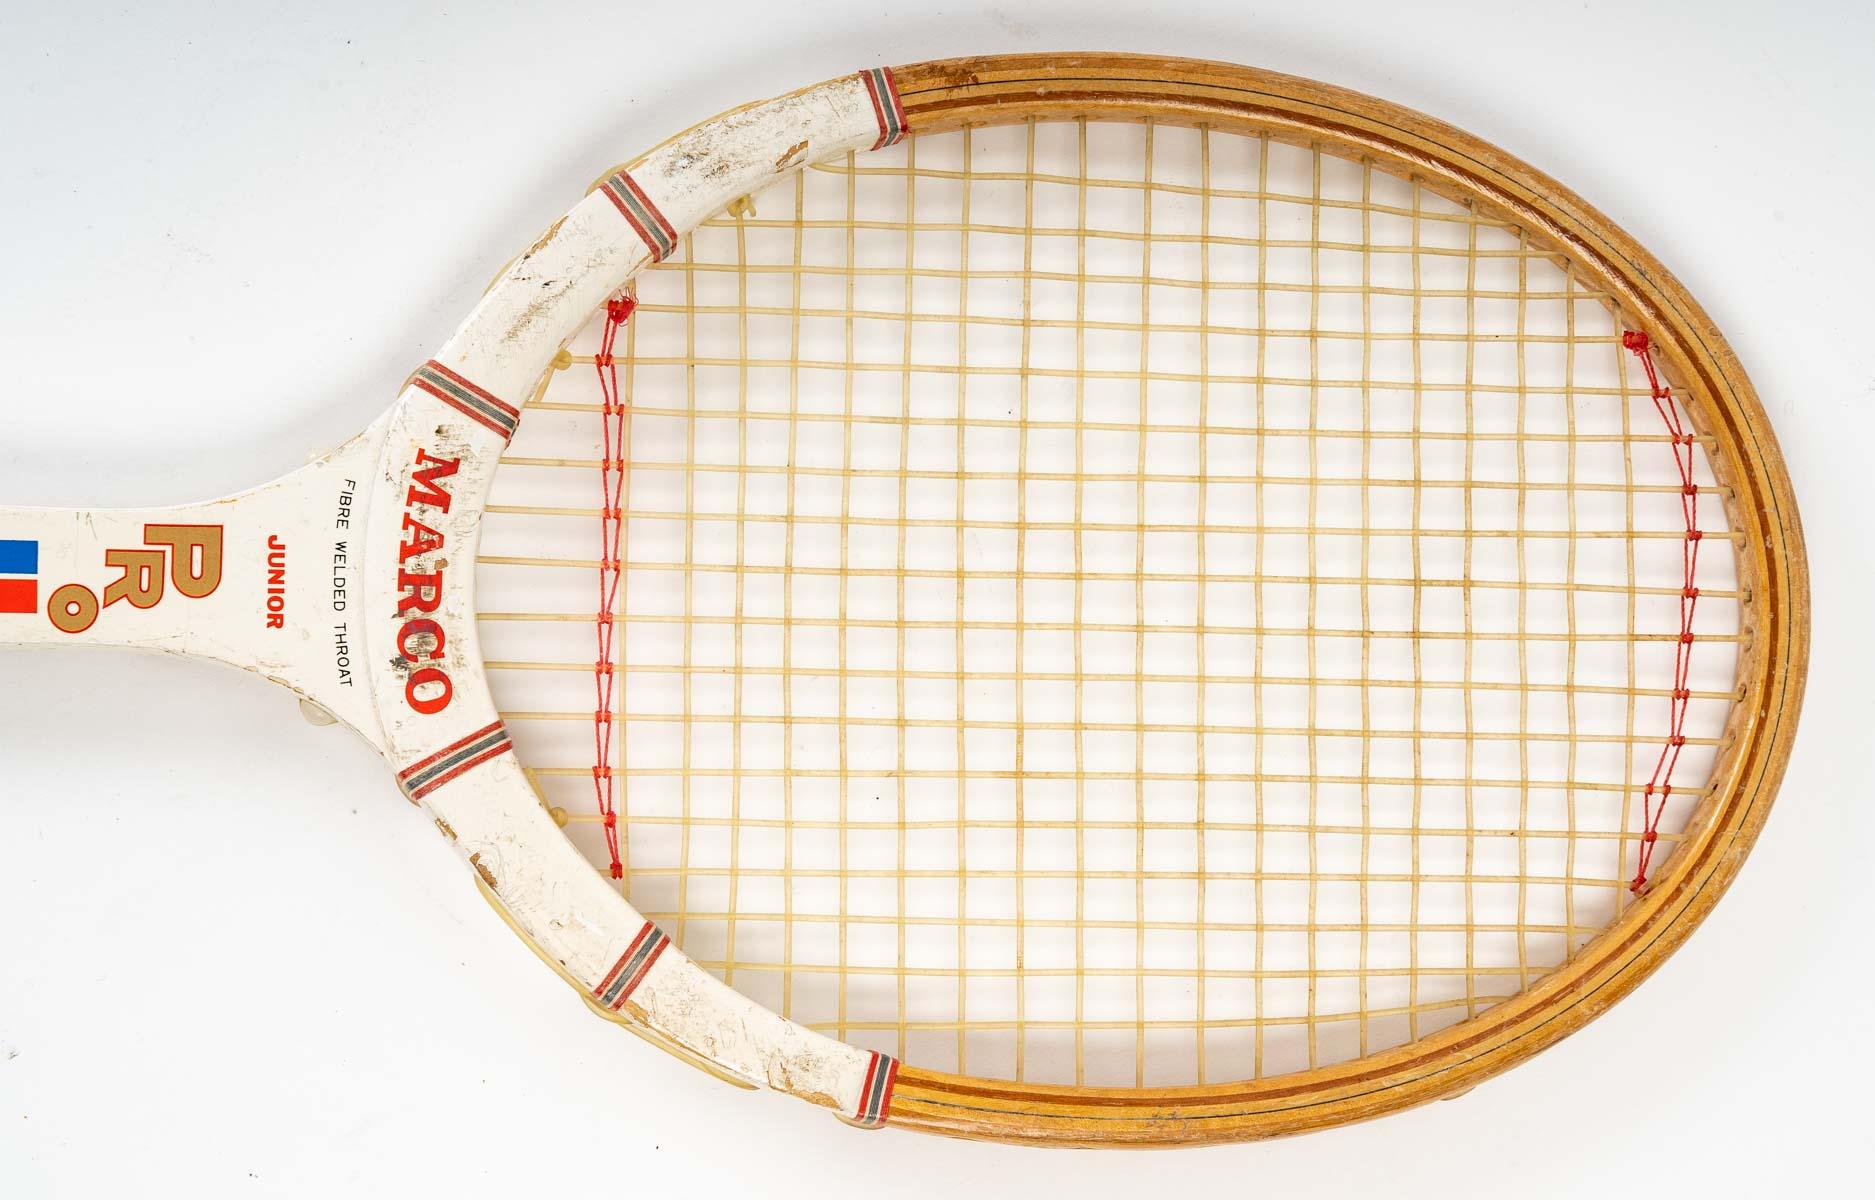 MarCo Tennis Racket, Junior Pro In Good Condition For Sale In Saint-Ouen, FR